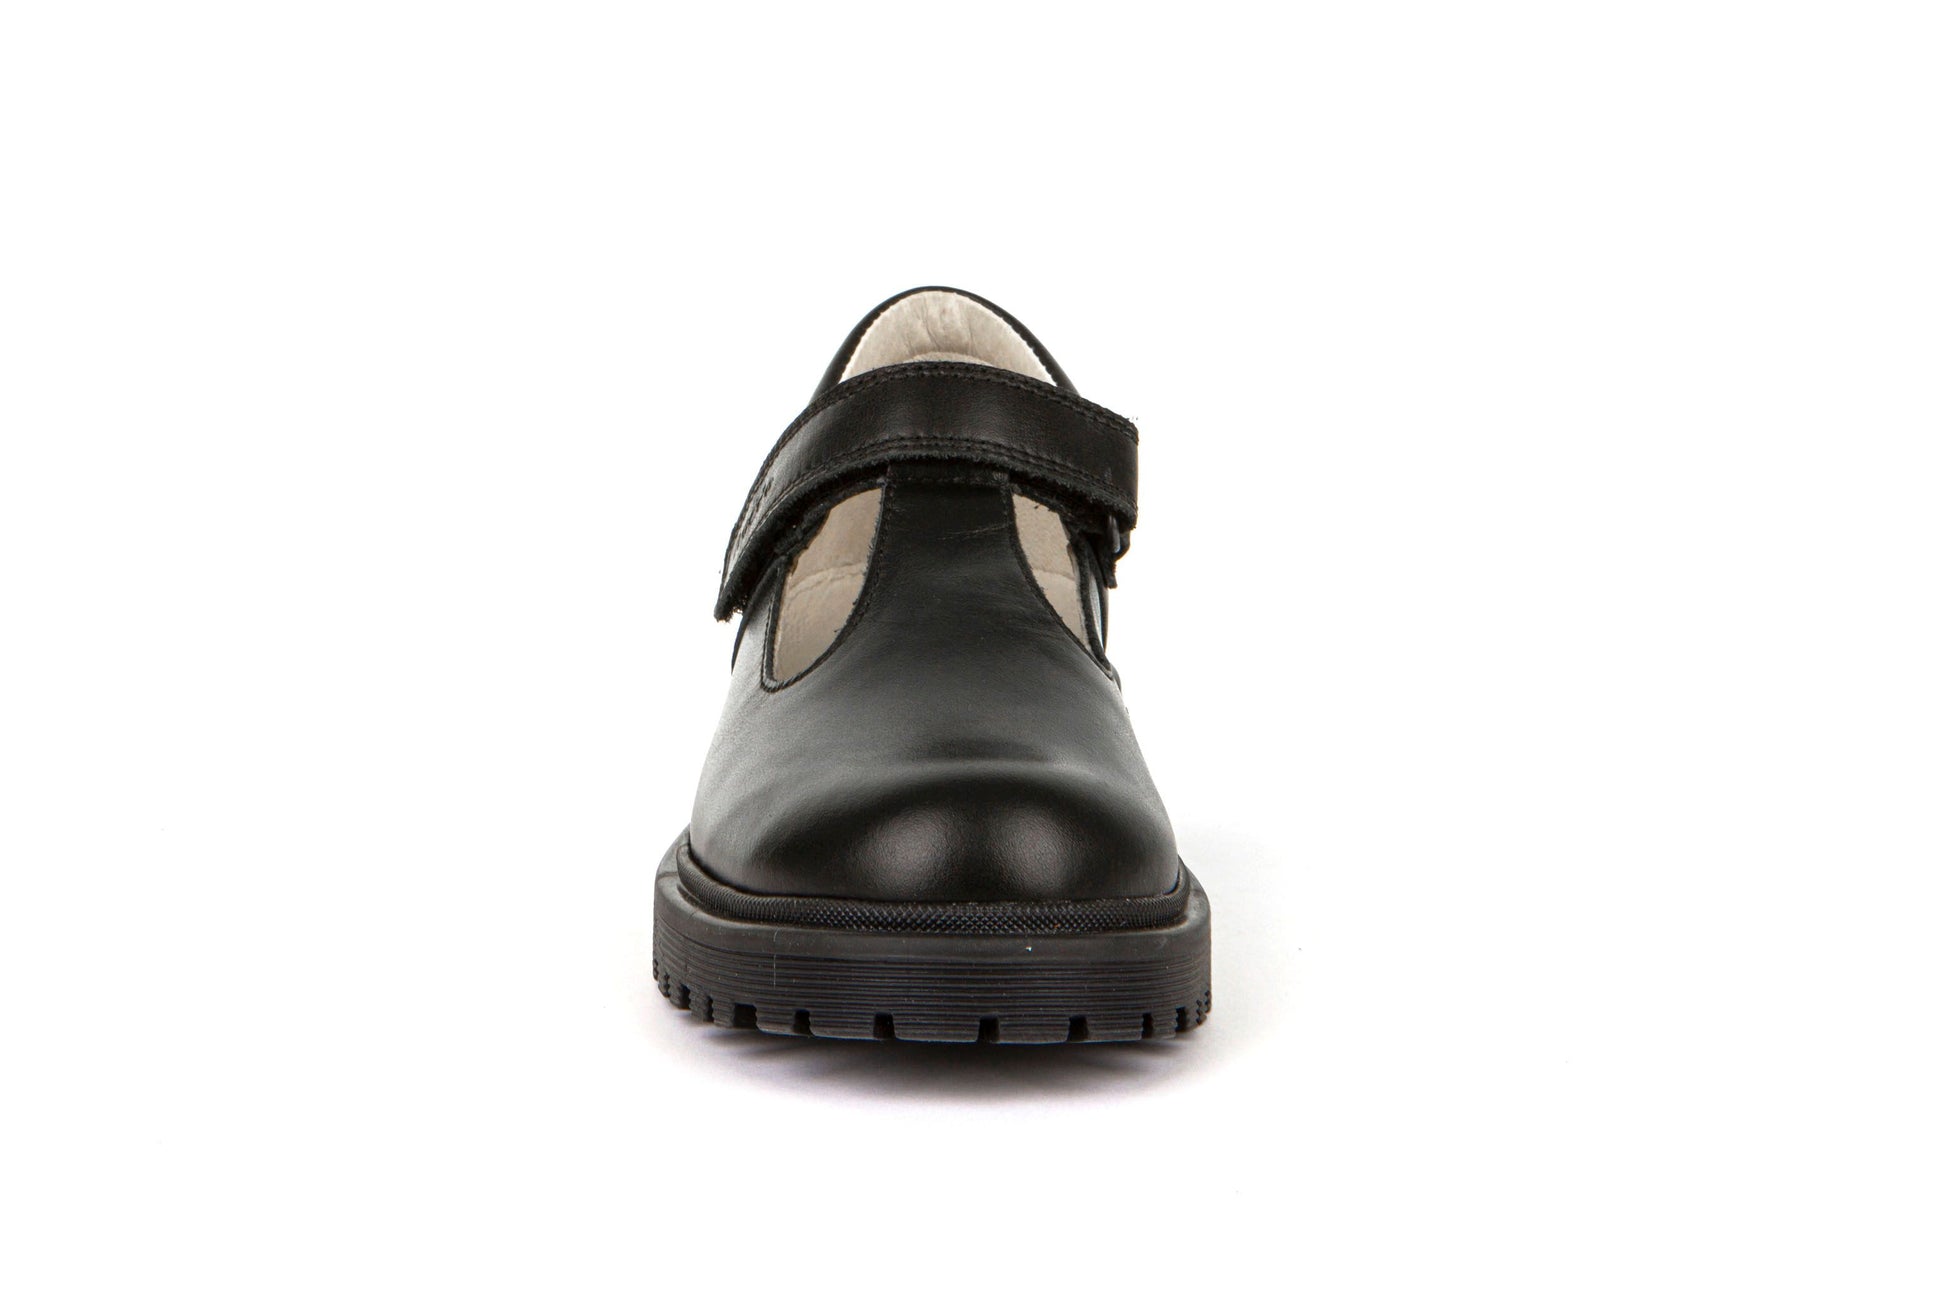 A girls T Bar school shoe by Froddo, style Lea T, in black leather with velcro fastening. Front view.